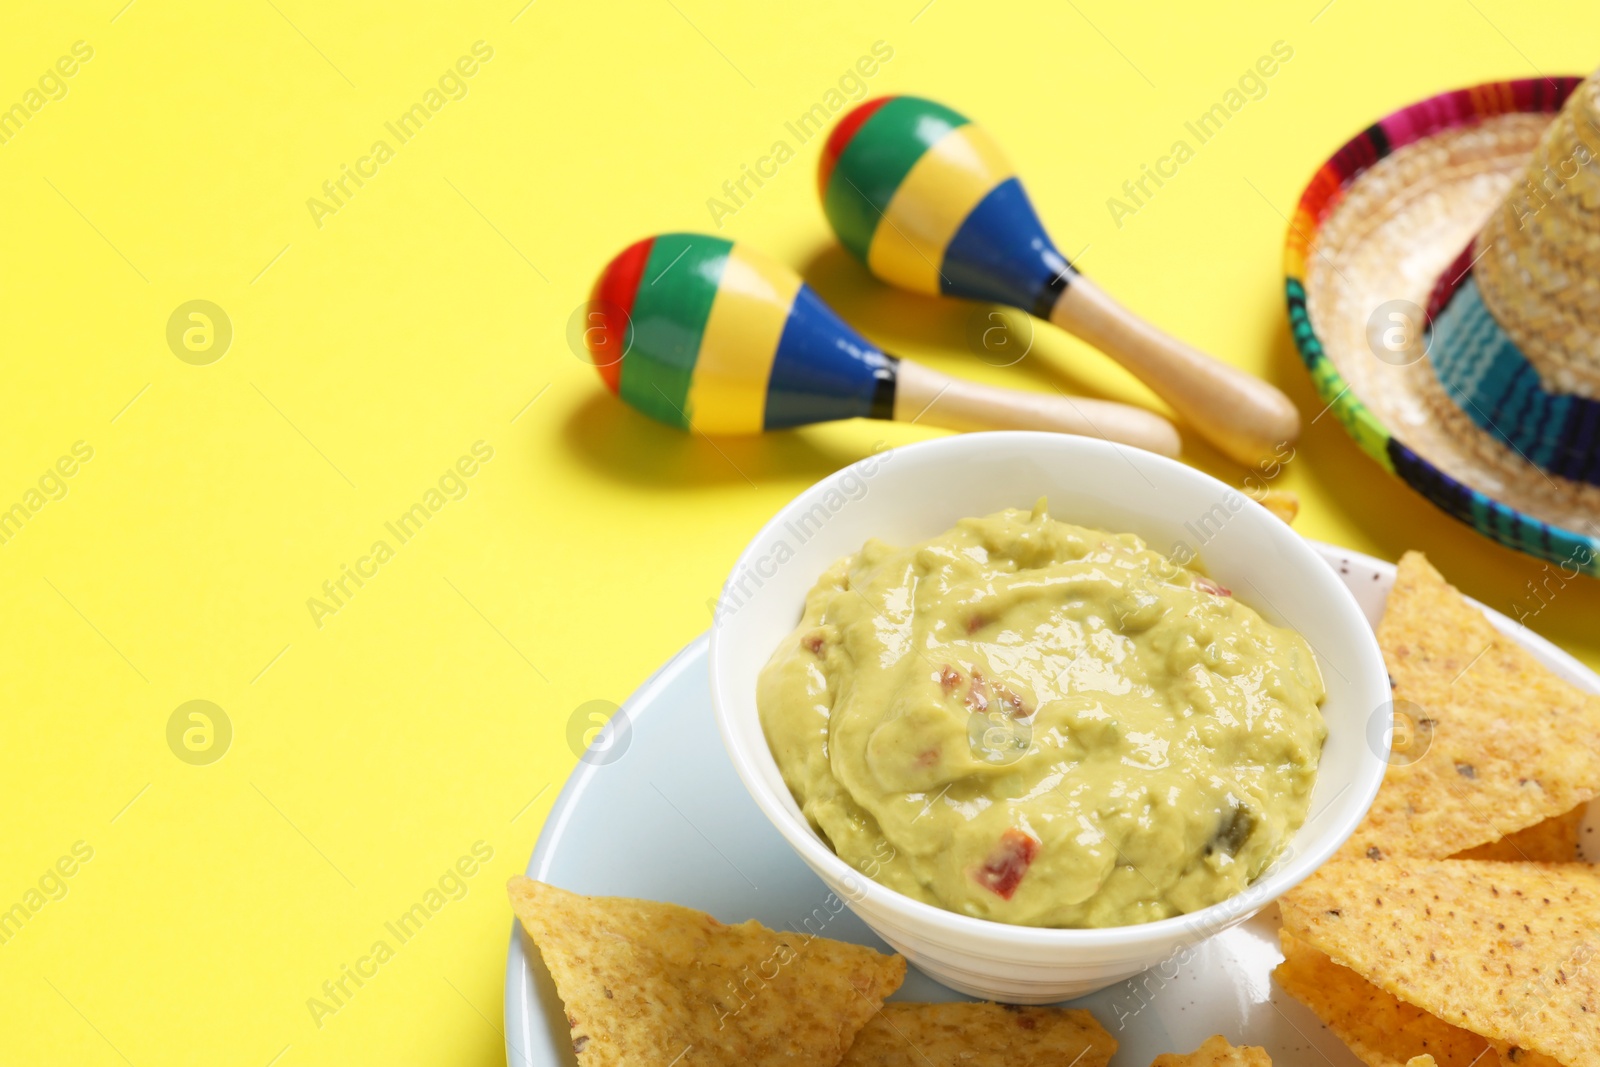 Photo of Nachos chips, guacamole, maracas and Mexican sombrero hat on yellow background, closeup. Space for text